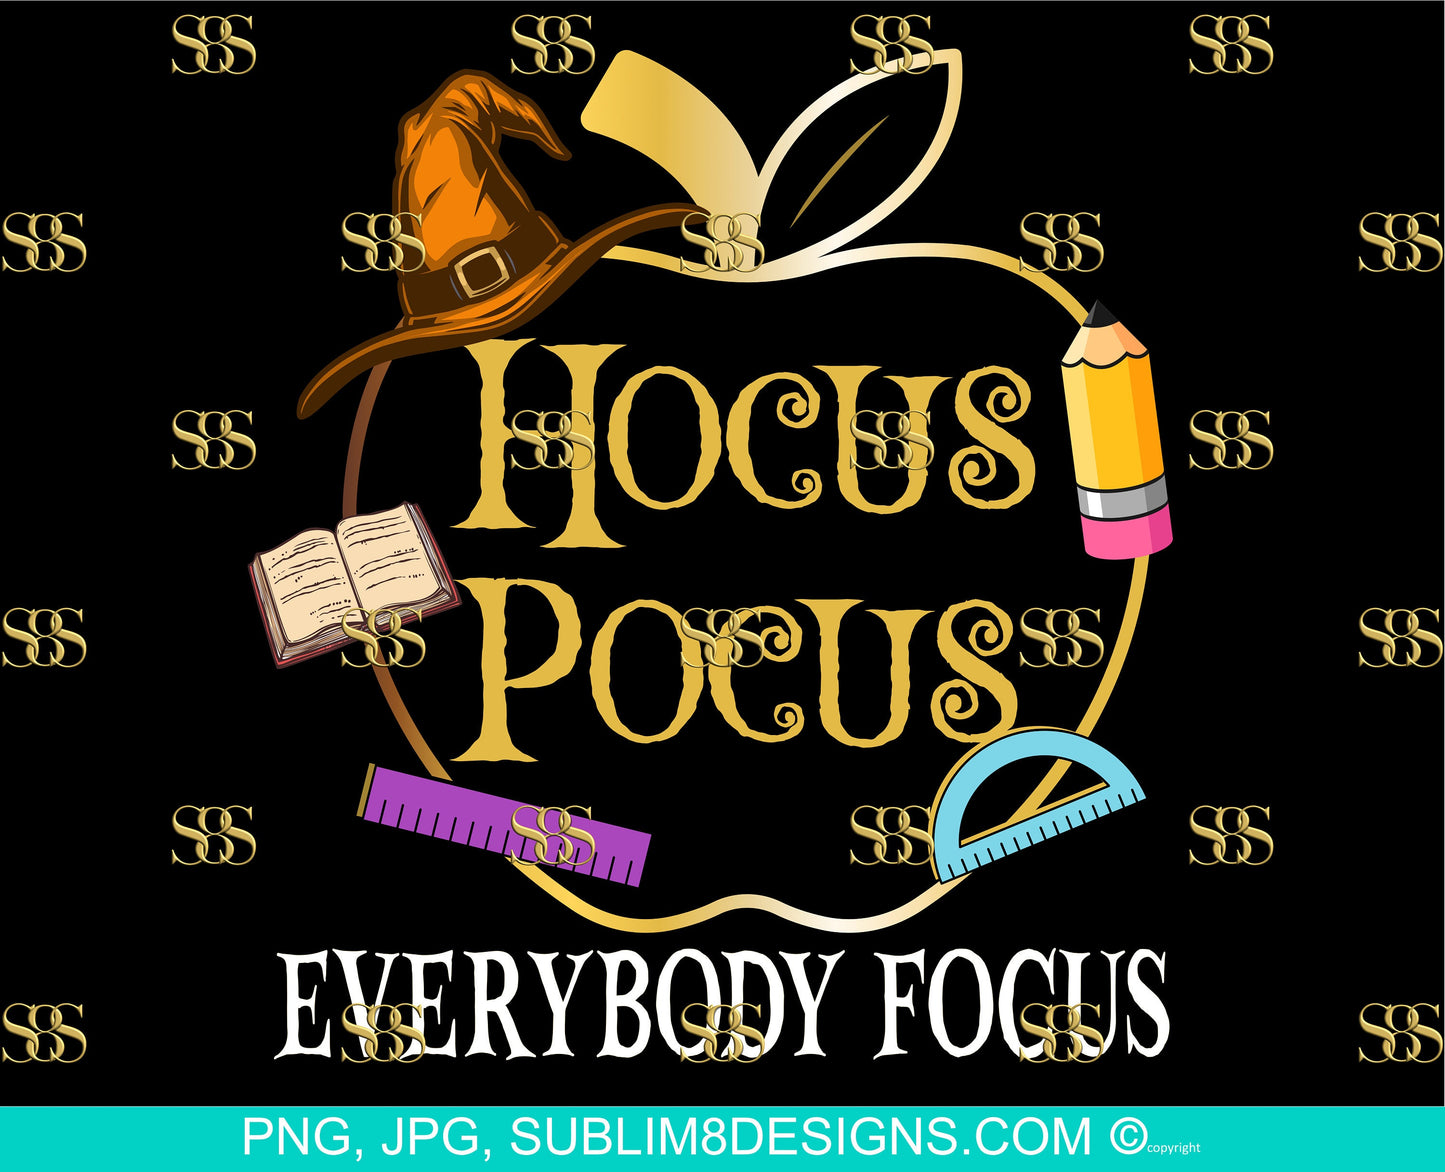 Hocus Pocus Everybody Focus PNG ONLY